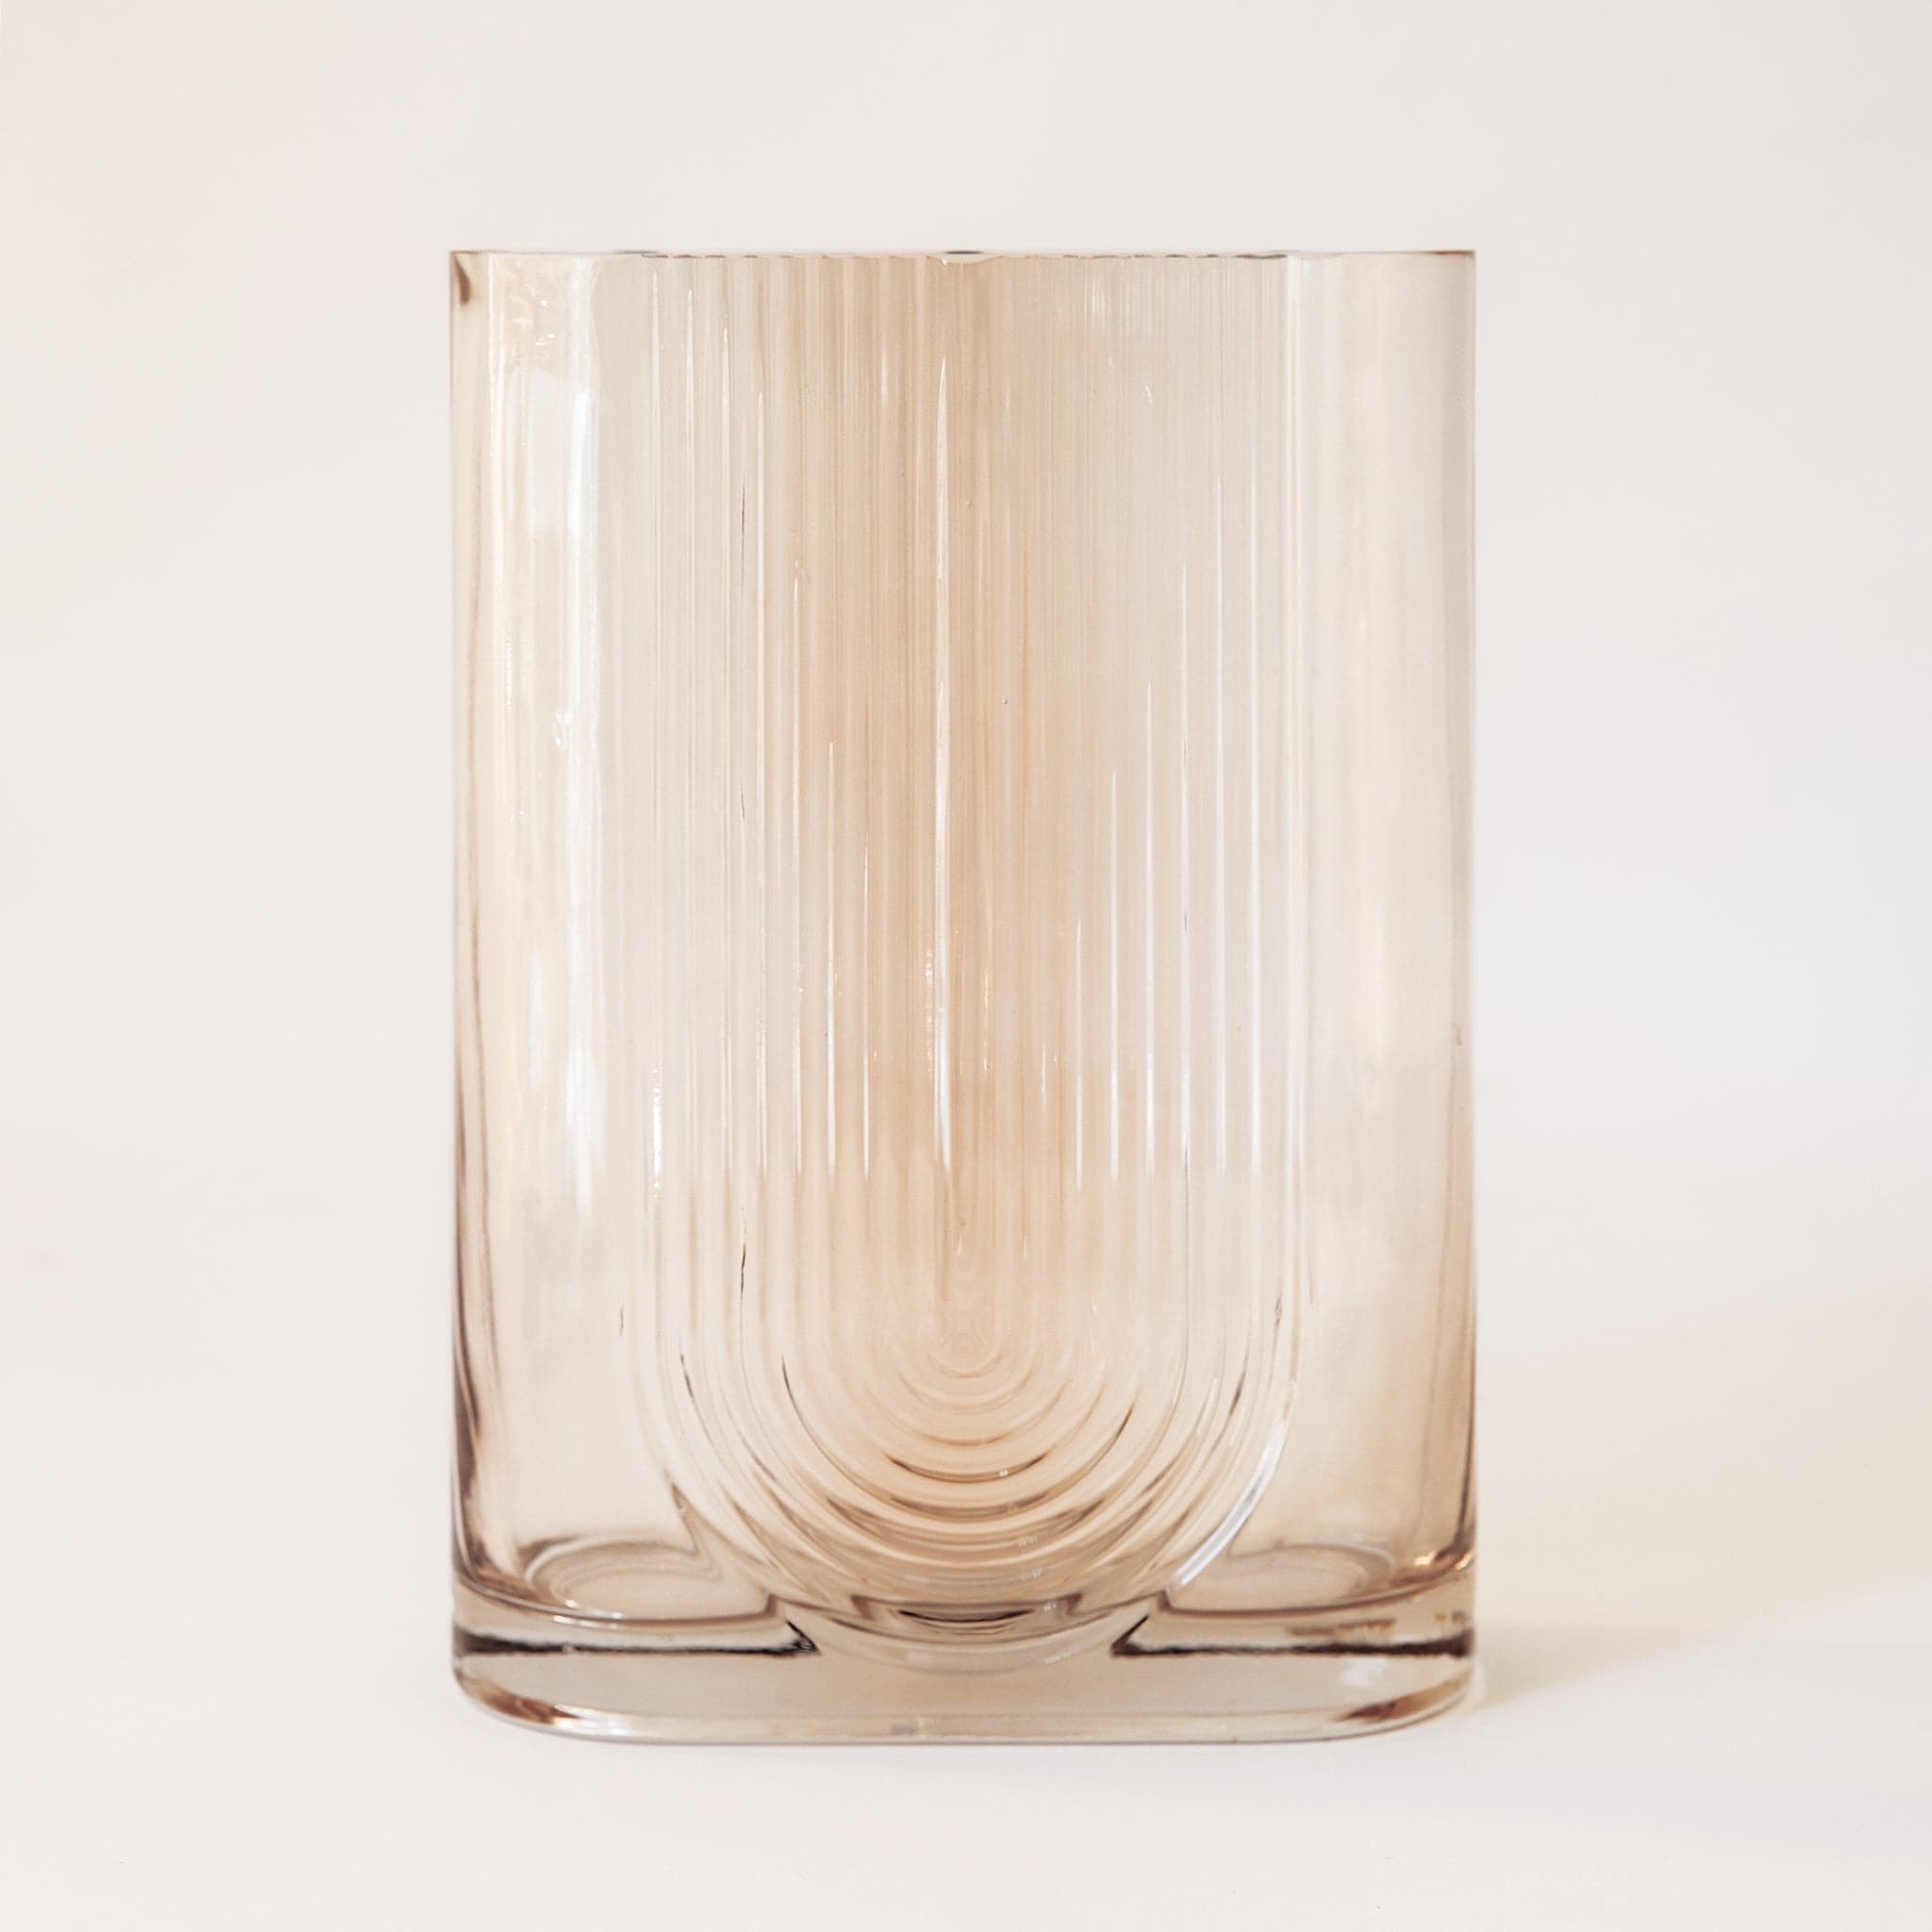 The morena vase in large alone. The morena vase has a unique shape. It is made from glass and has an oblong opening. The body of the vase is tall and angular resembling a square or rectangle, but with a pill-shaped opening the same width as the vase. There is a design on the front resembling a boho, upside-down rainbow design.